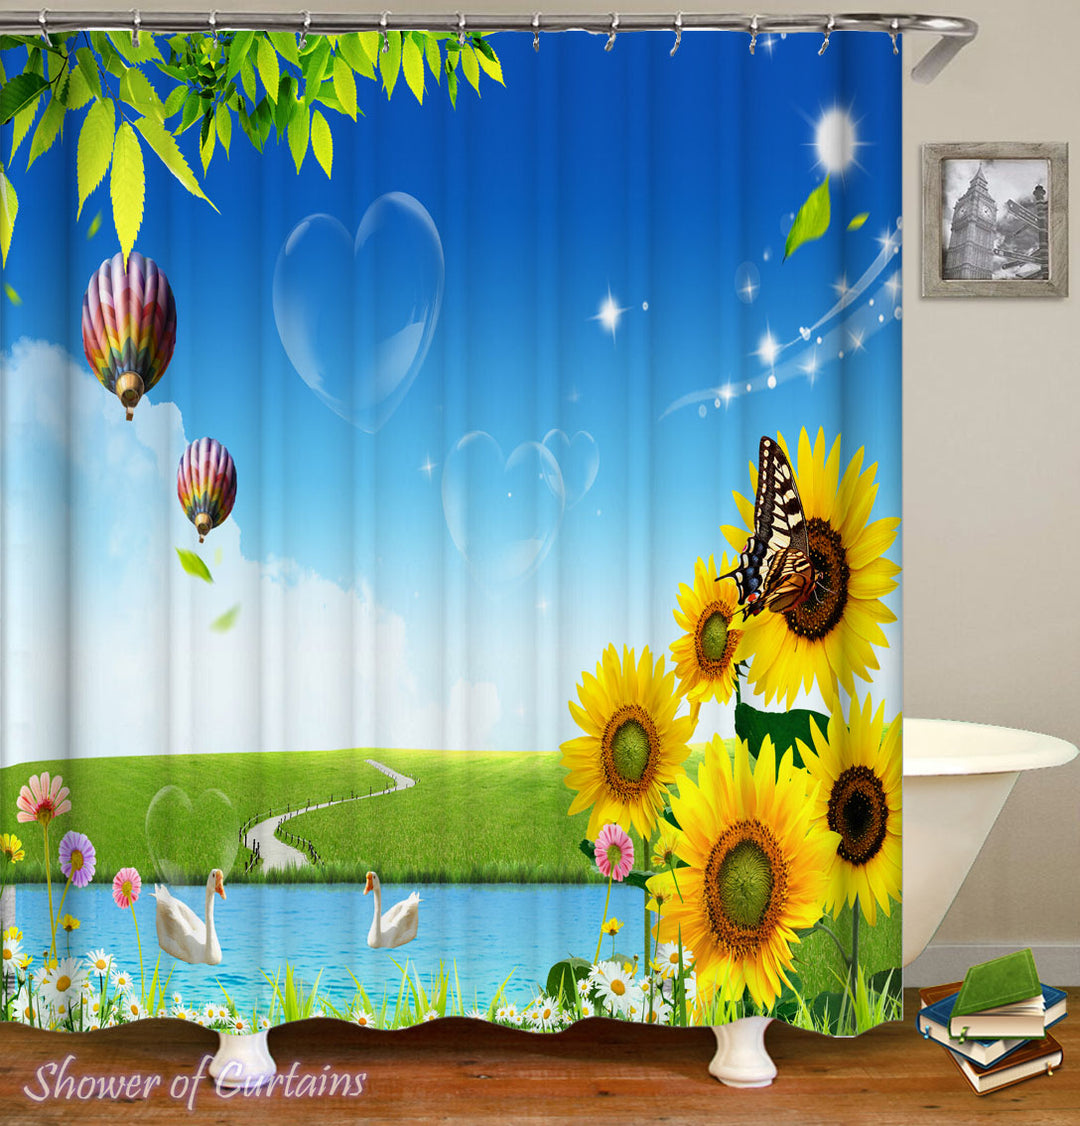 Shower Curtains Designs - A Beautiful Day